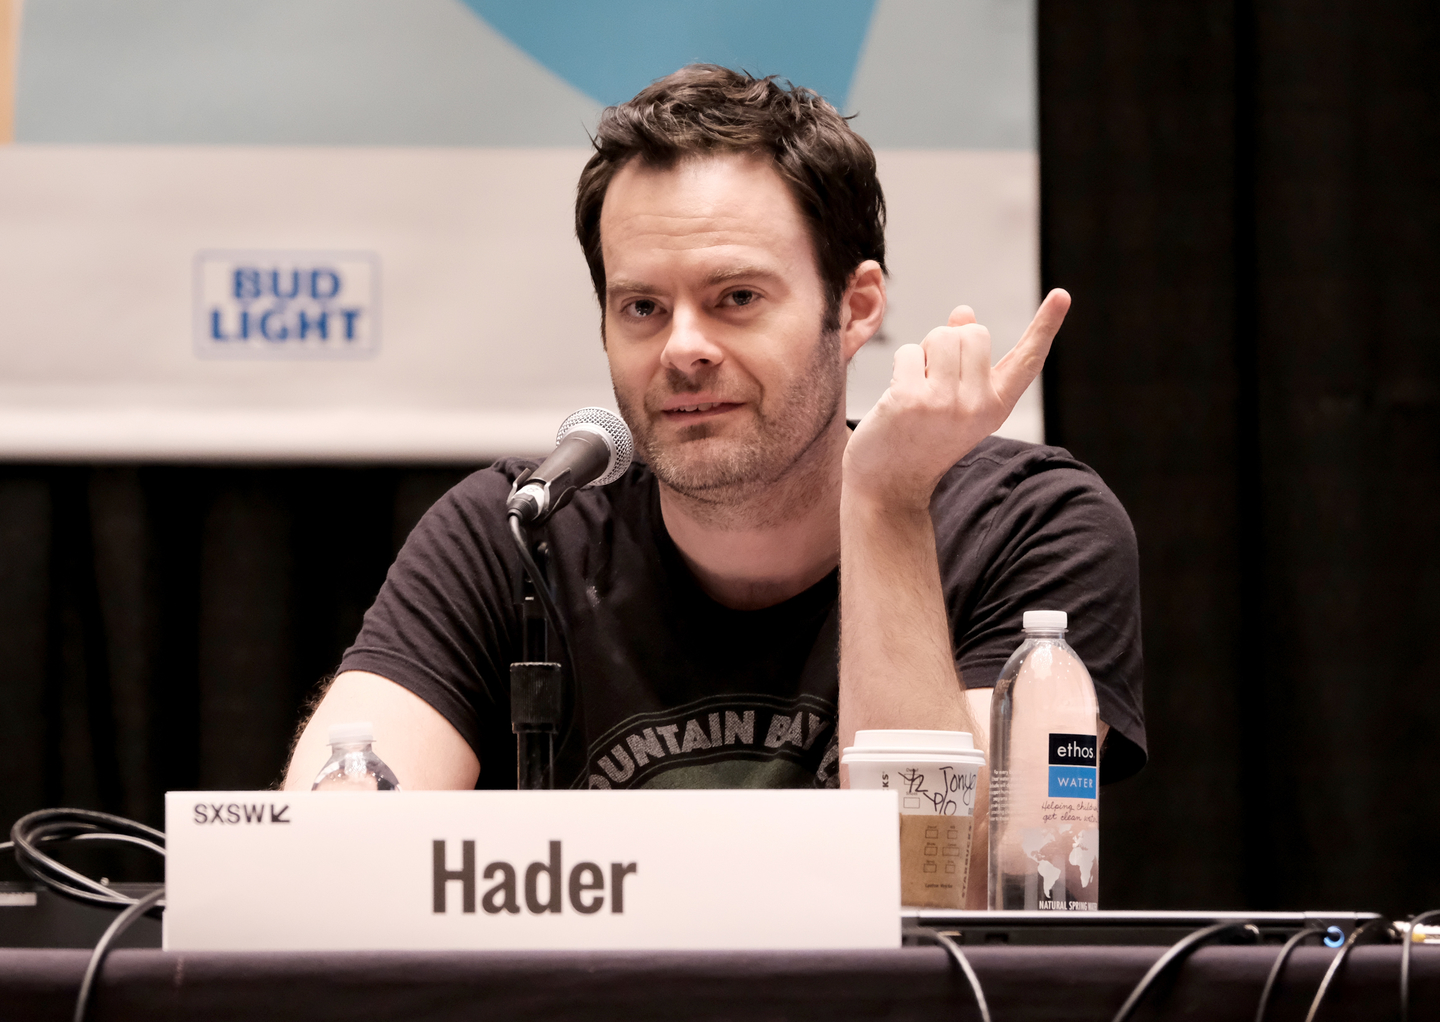 Bill Hader, in town for the World Premiere of Barry, joined the “Maltin on Movies” panel. Photo by Hubert Vestil/Getty Images for SXSW